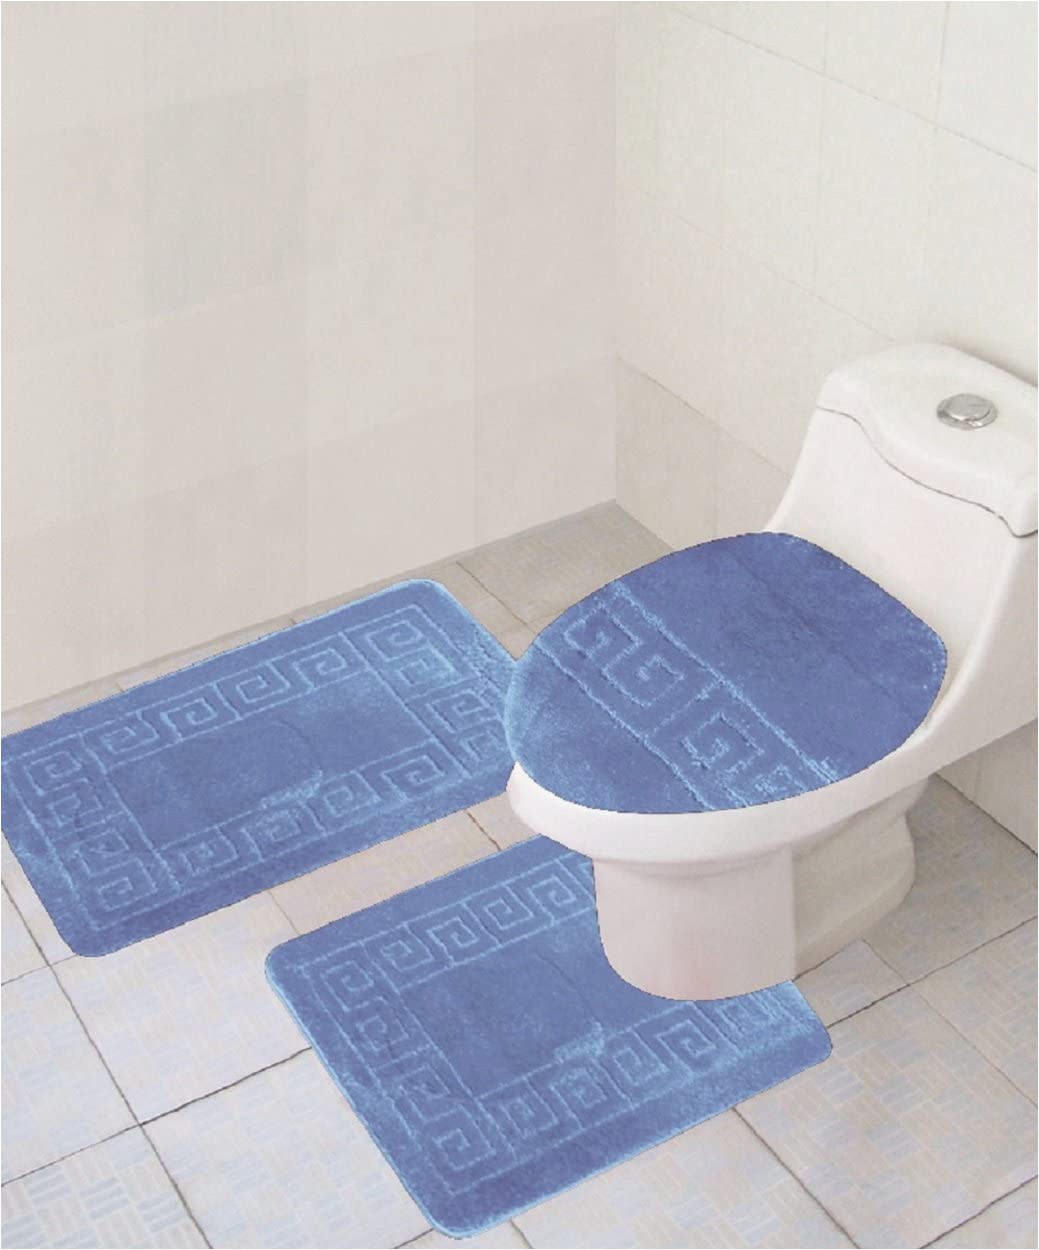 Three Piece Bathroom Rug Sets Wpm World Products Mart 3 Piece Bath Rug Set Pattern Bathroom Rug 20"x32" Contour Mat 20"x20" with Lid Cover Pink